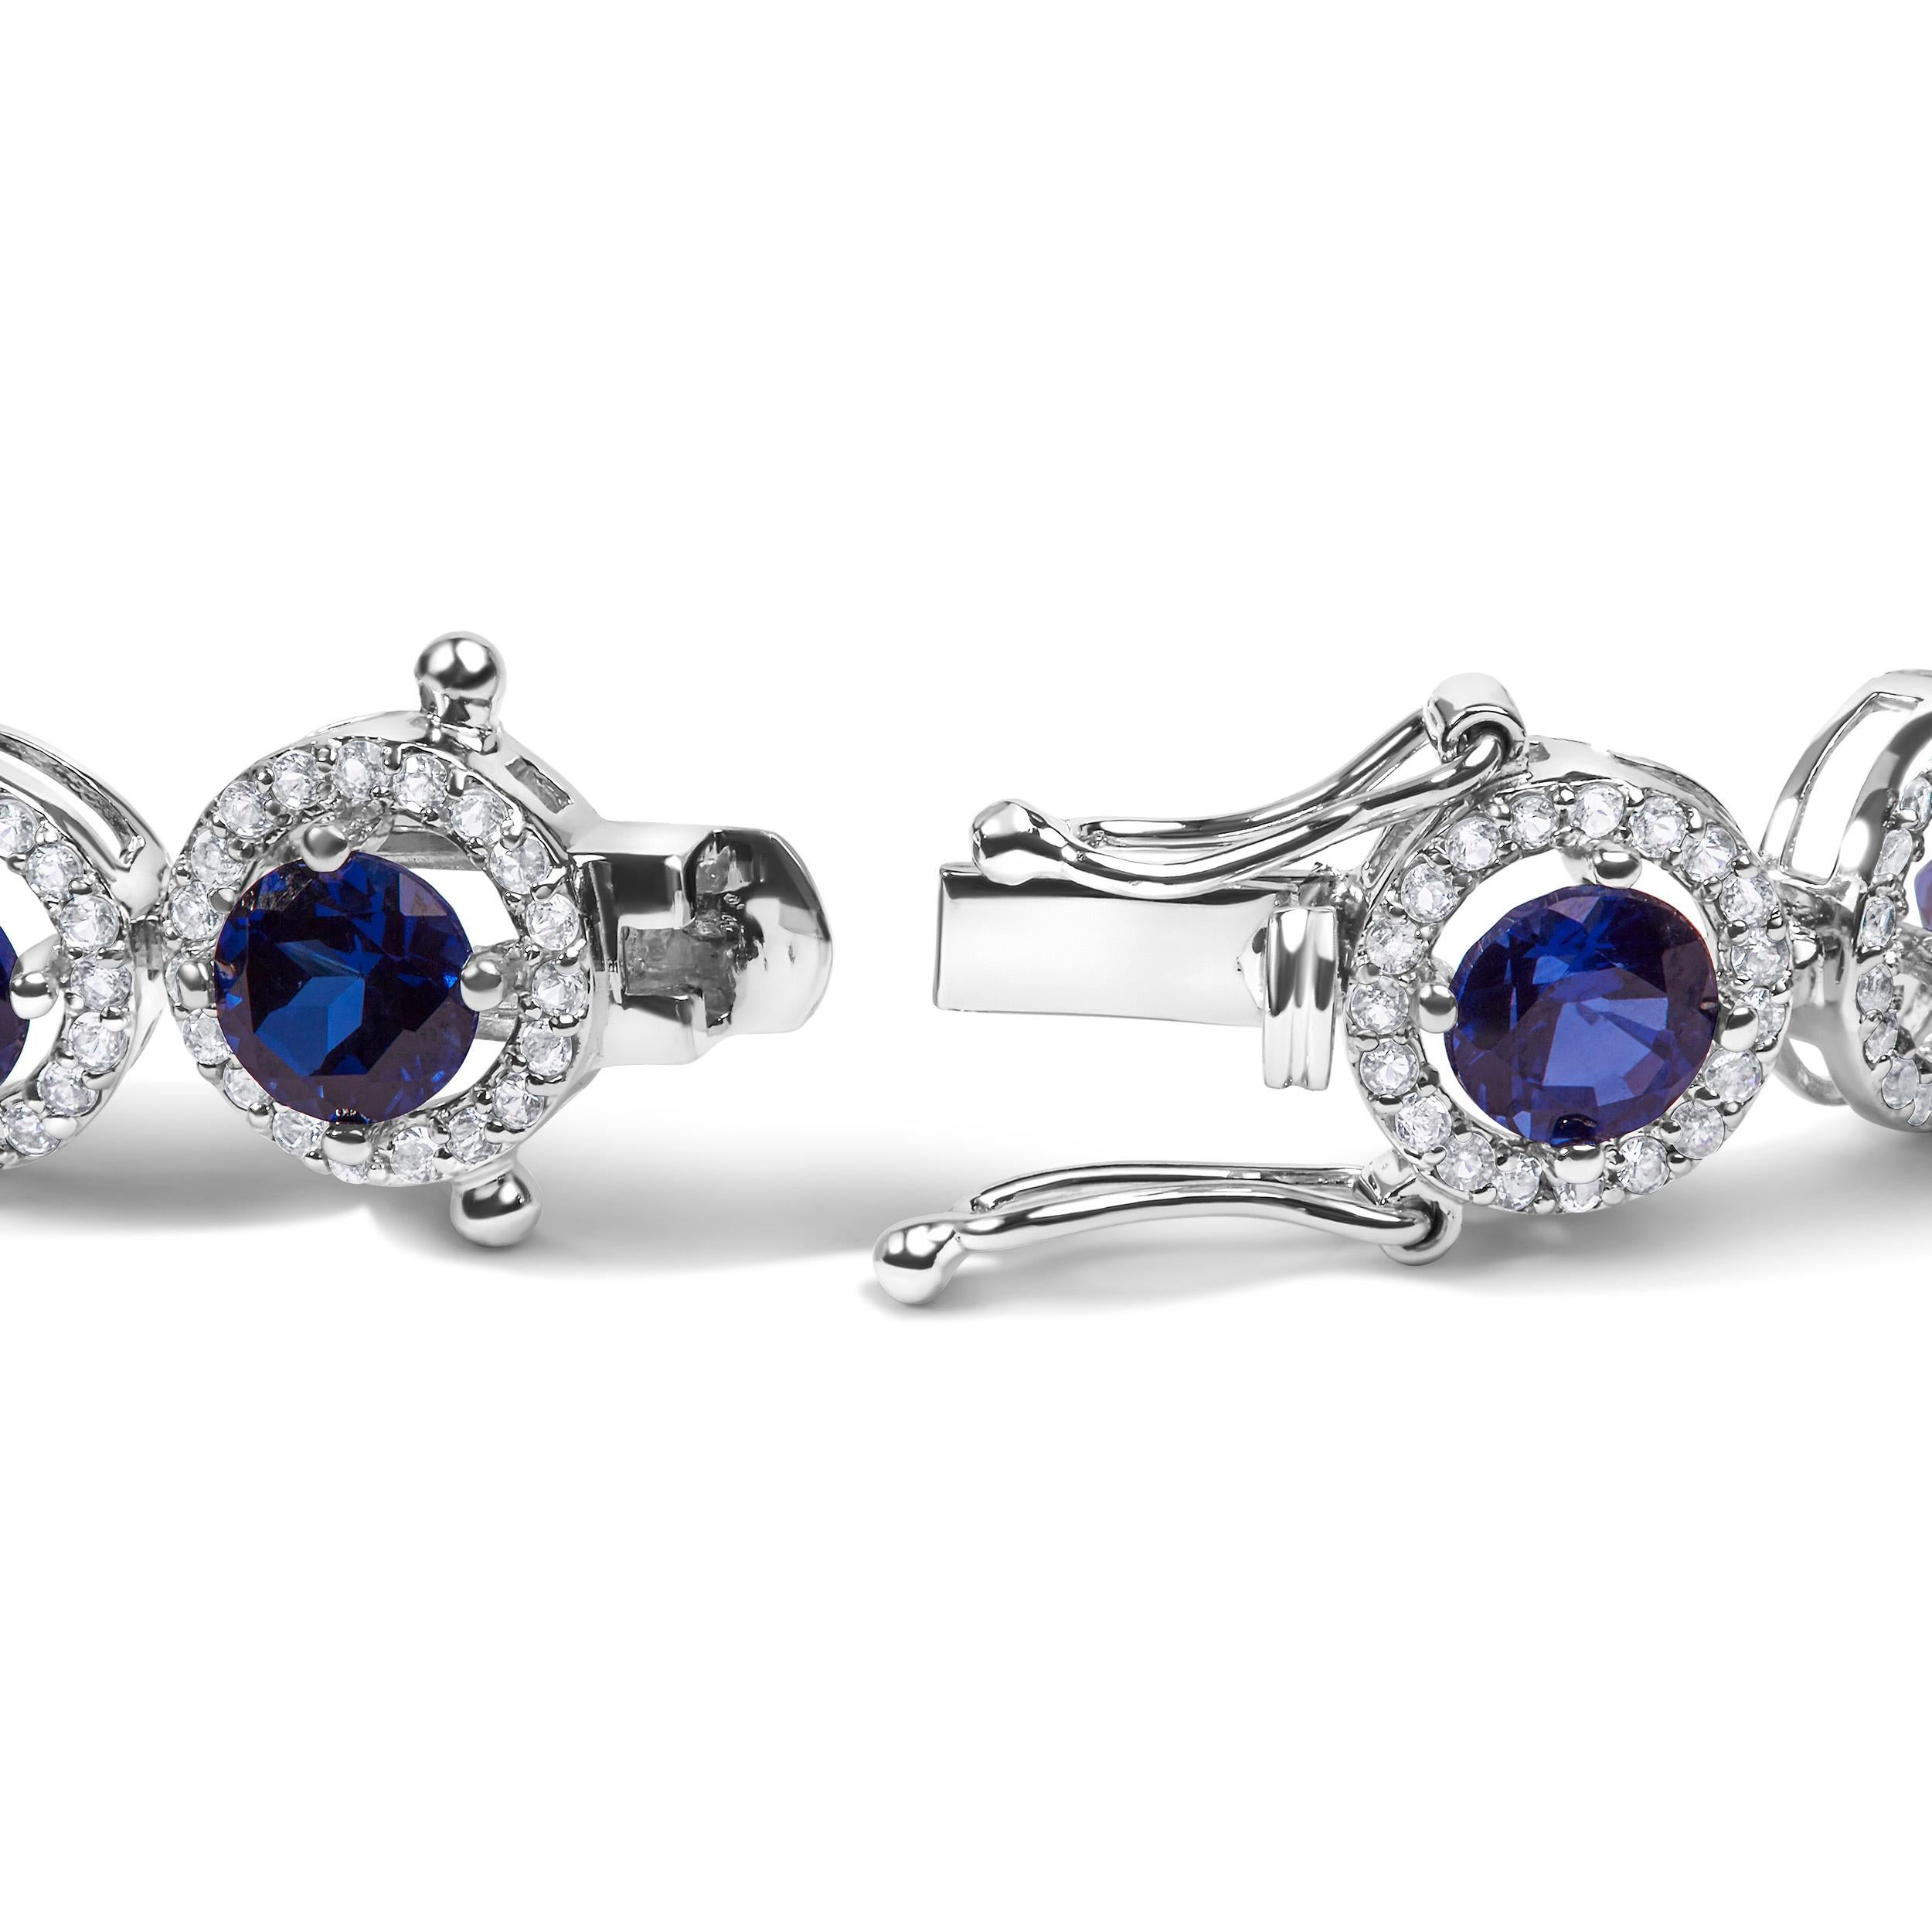 Indulge in the celestial allure of this captivating .925 Sterling Silver Link Bracelet. Adorned with a mesmerizing 21.0 Cttw of lab-created Blue Sapphire and White Topaz gemstones, this bracelet exudes a celestial charm. The elegant round-shaped